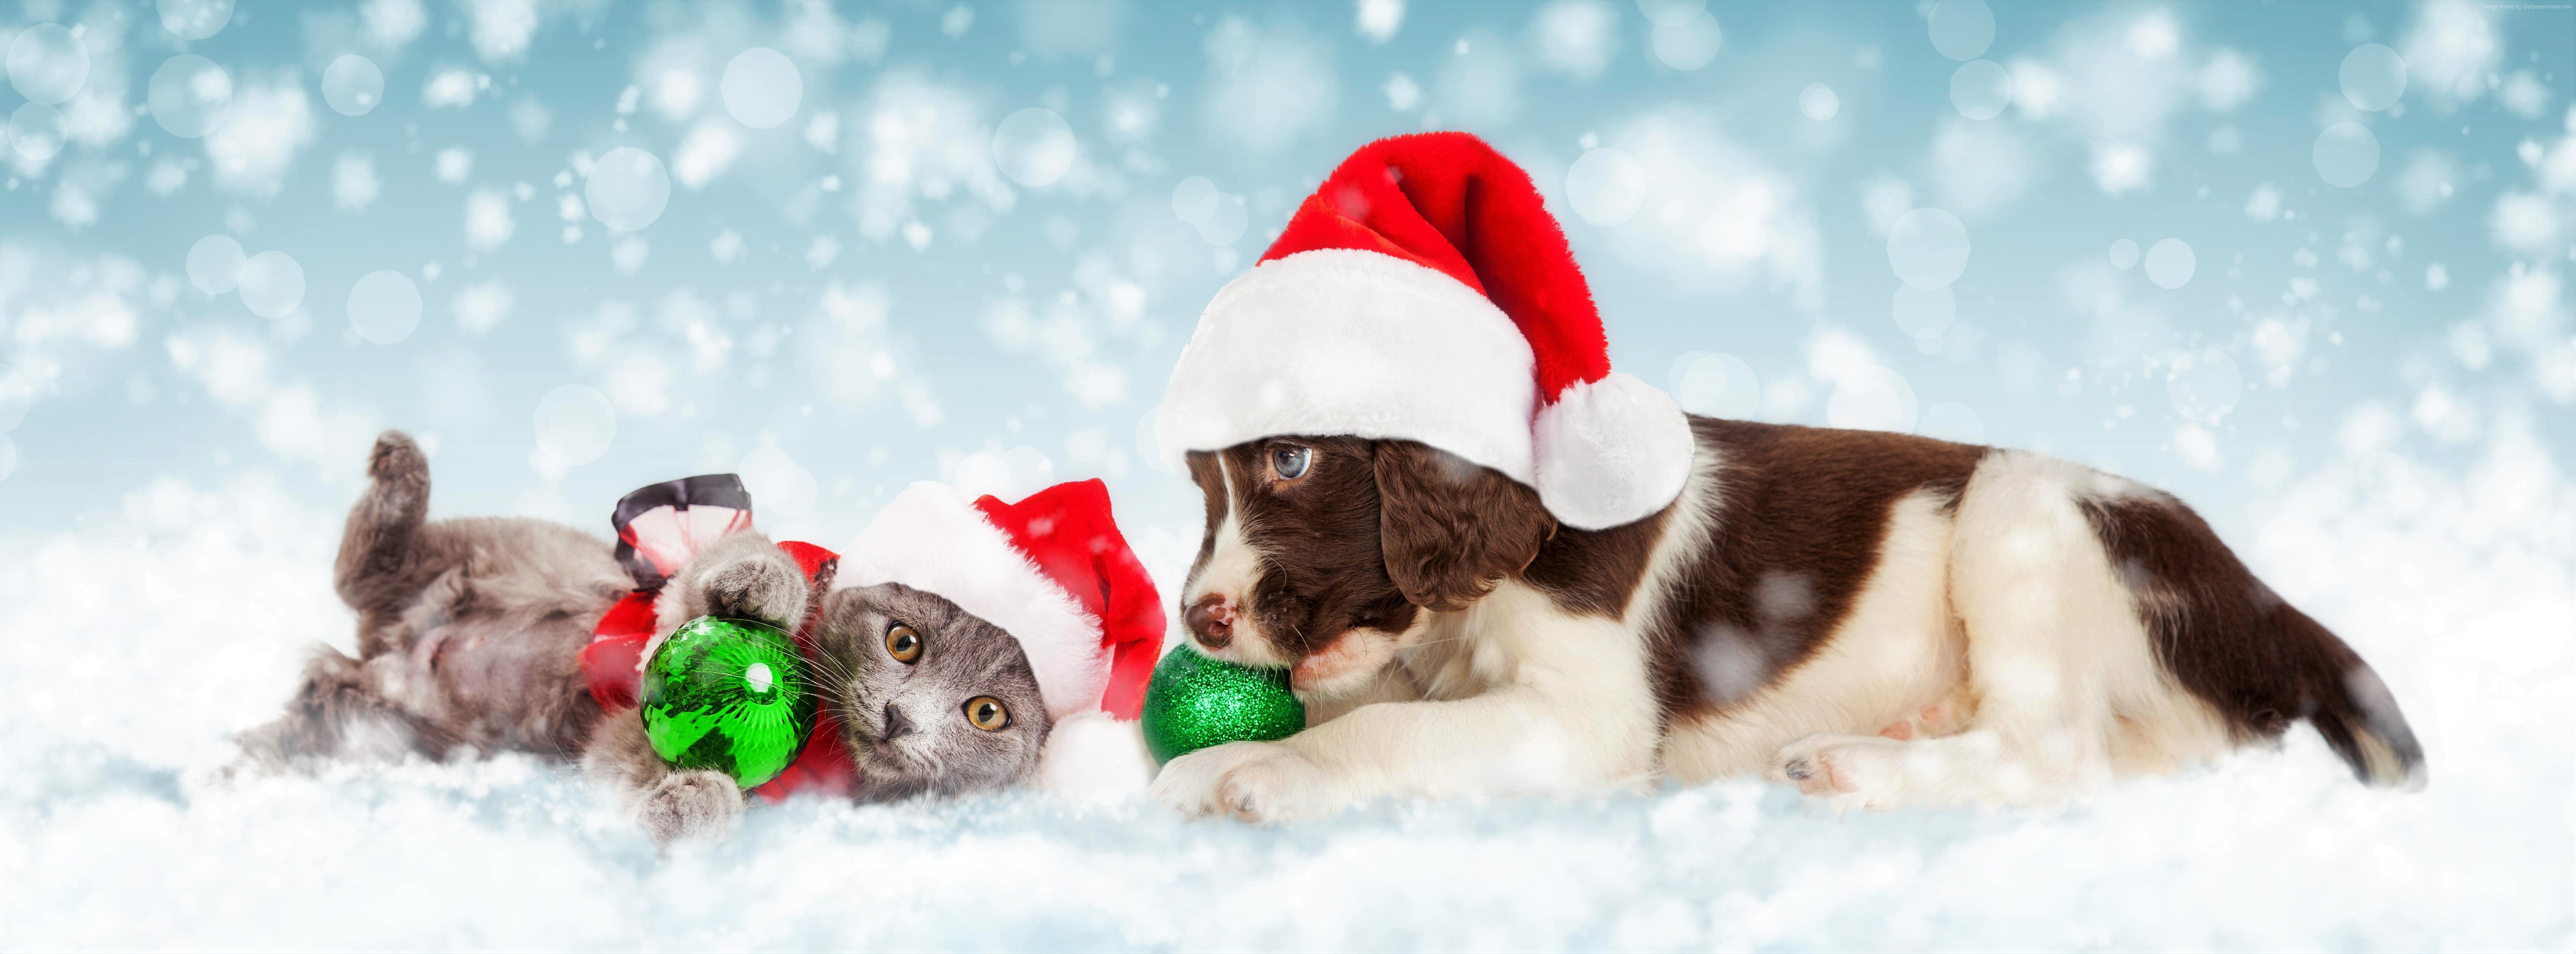 Christmas Puppies And Kittens Wallpaper